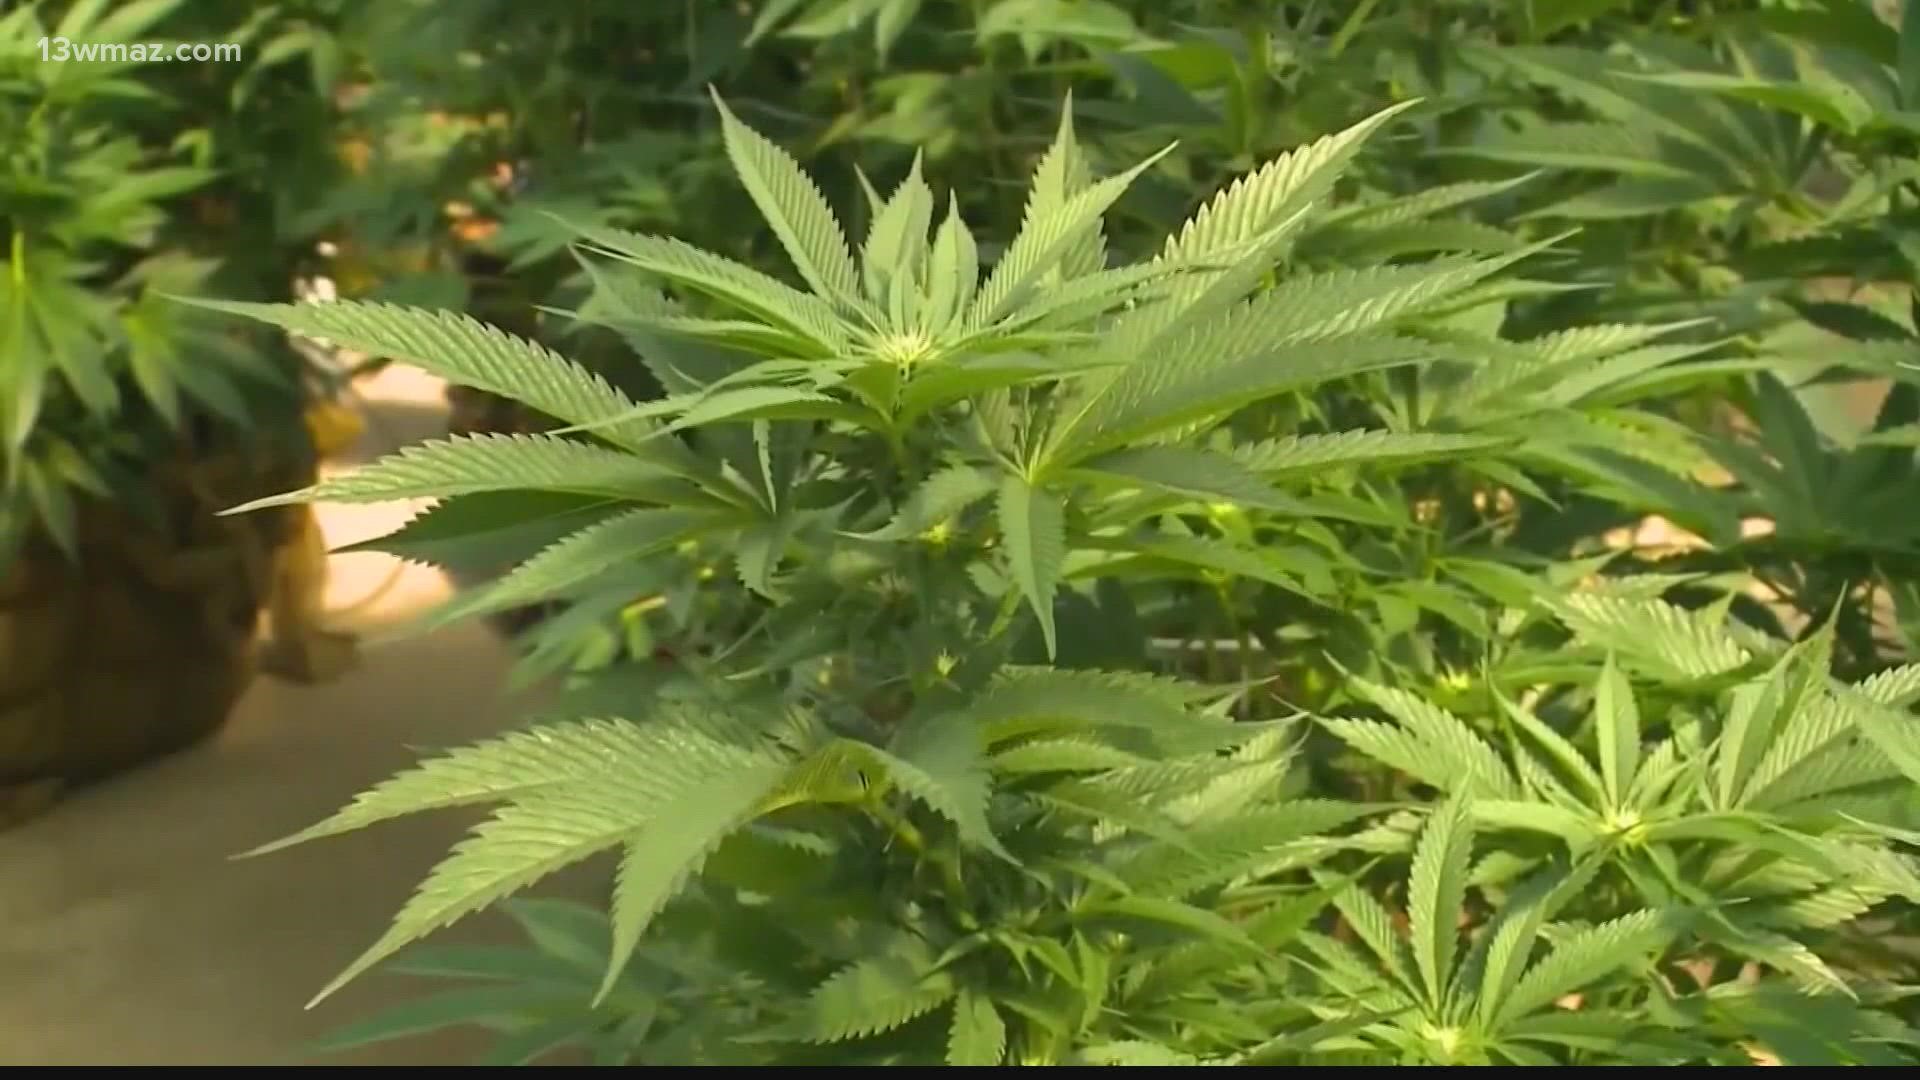 At the corner of Carl Vinson Highway and Carl Vinson Road, construction workers are going to build a 50,000 sq. ft medical marijuana facility.